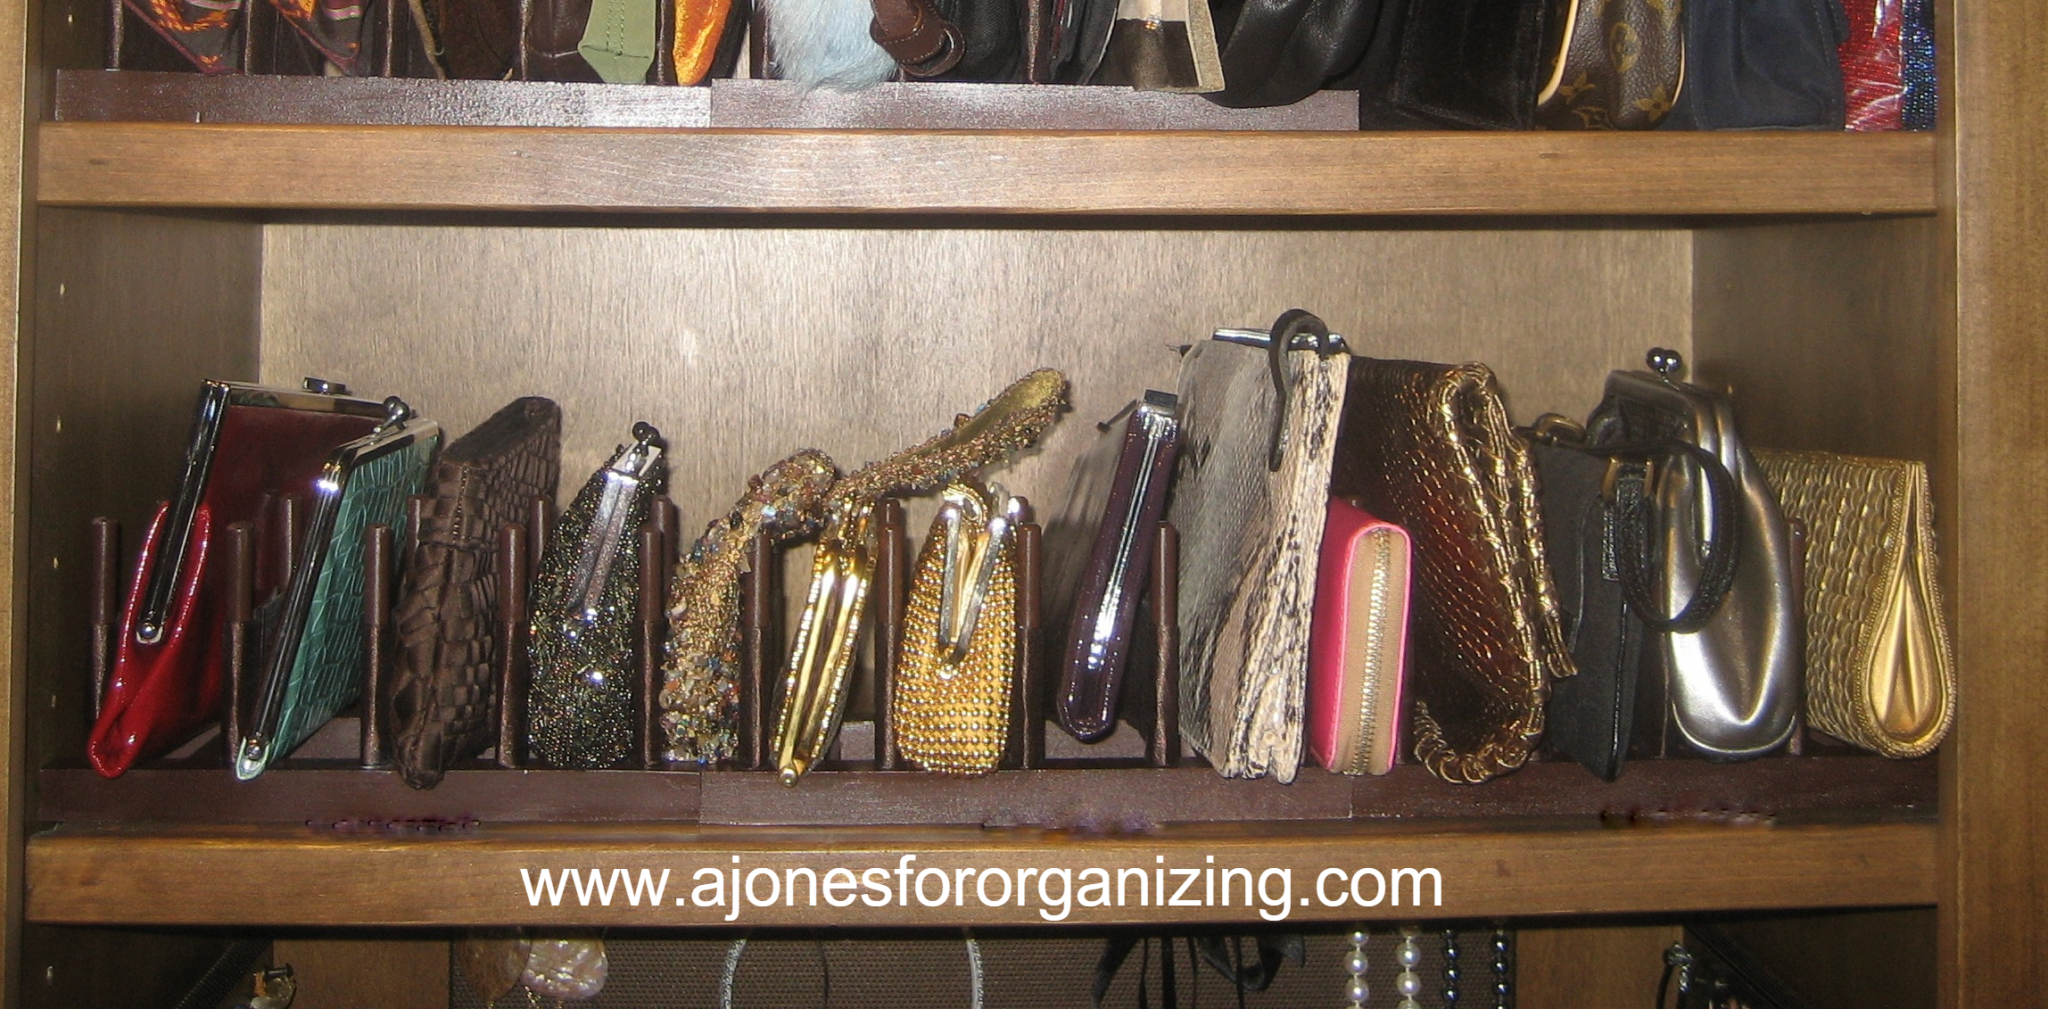 A Jones For Organizing  DIY - Storing Your Clutch Purses - A Jones For  Organizing